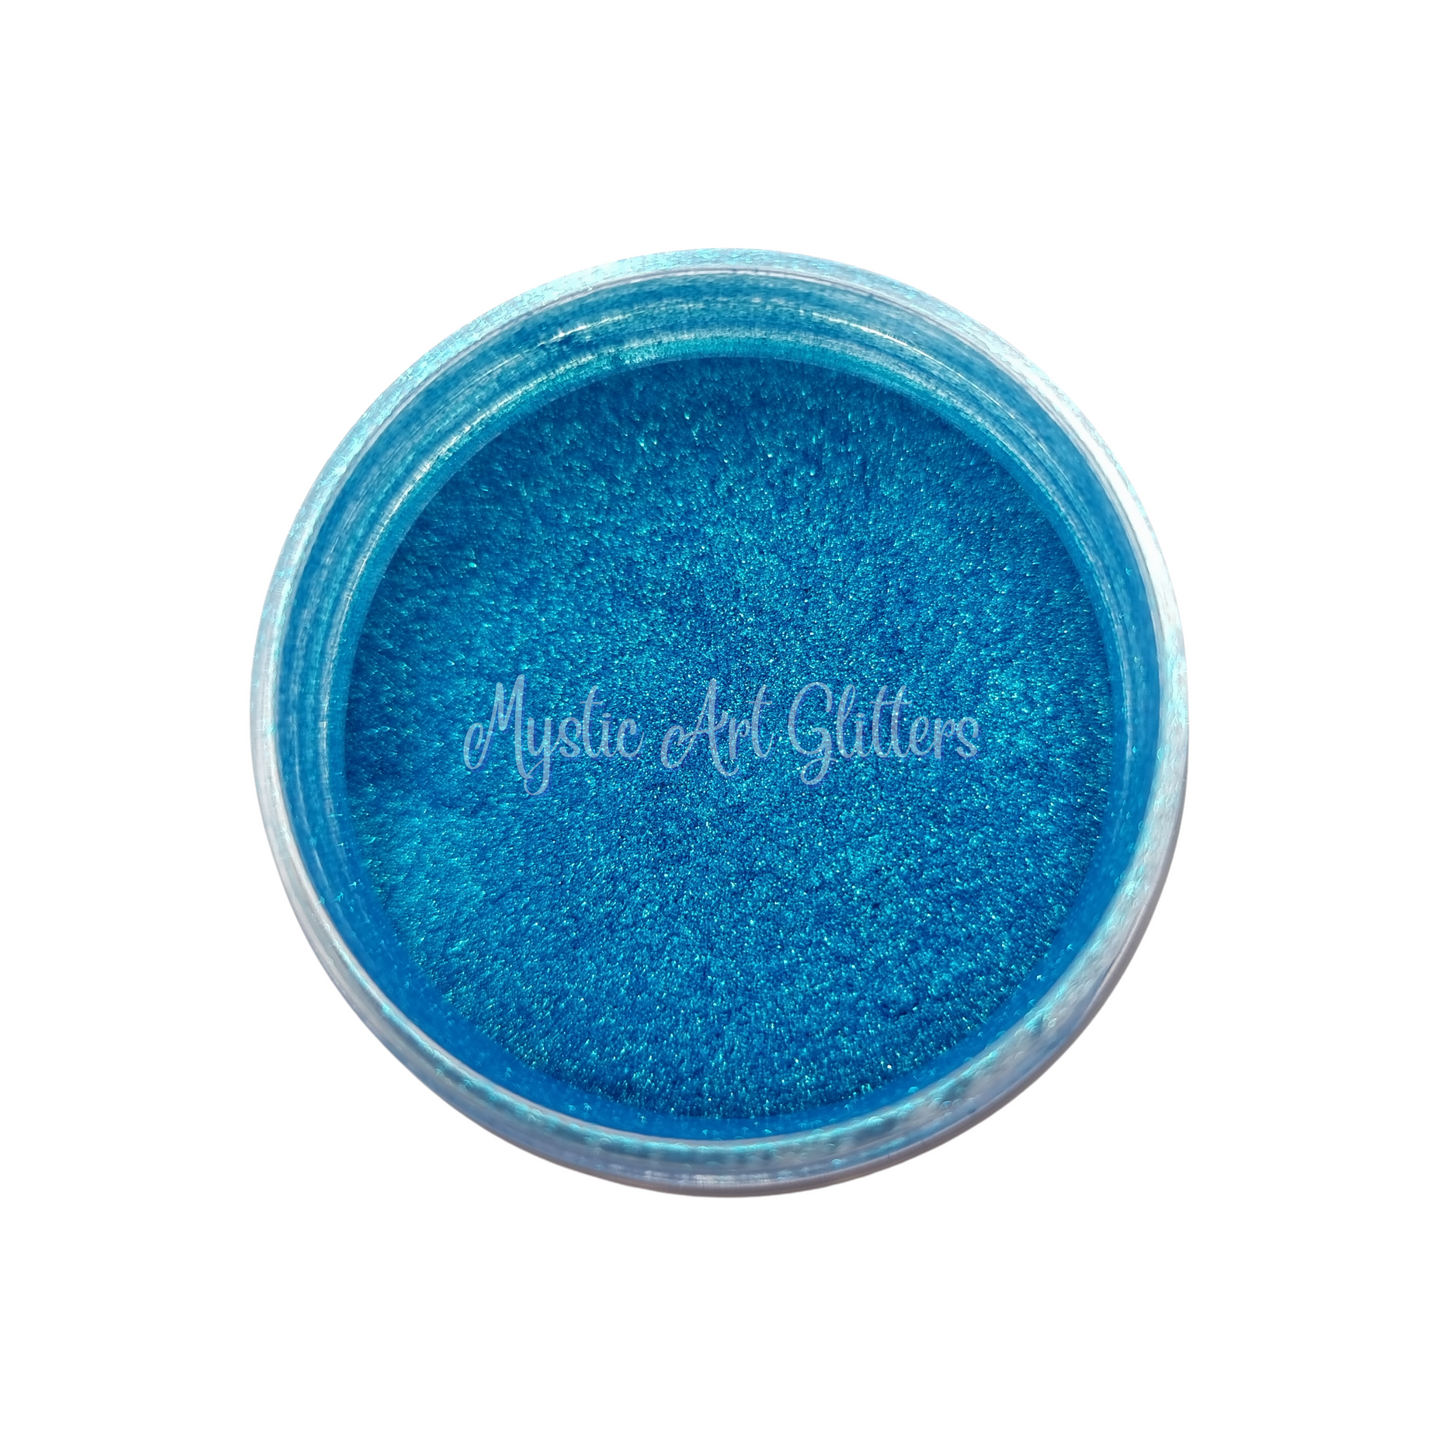 Chameleon Mica Powder - Sparkly Teal to Blue Shift 14gm - Mystic Art Glitters